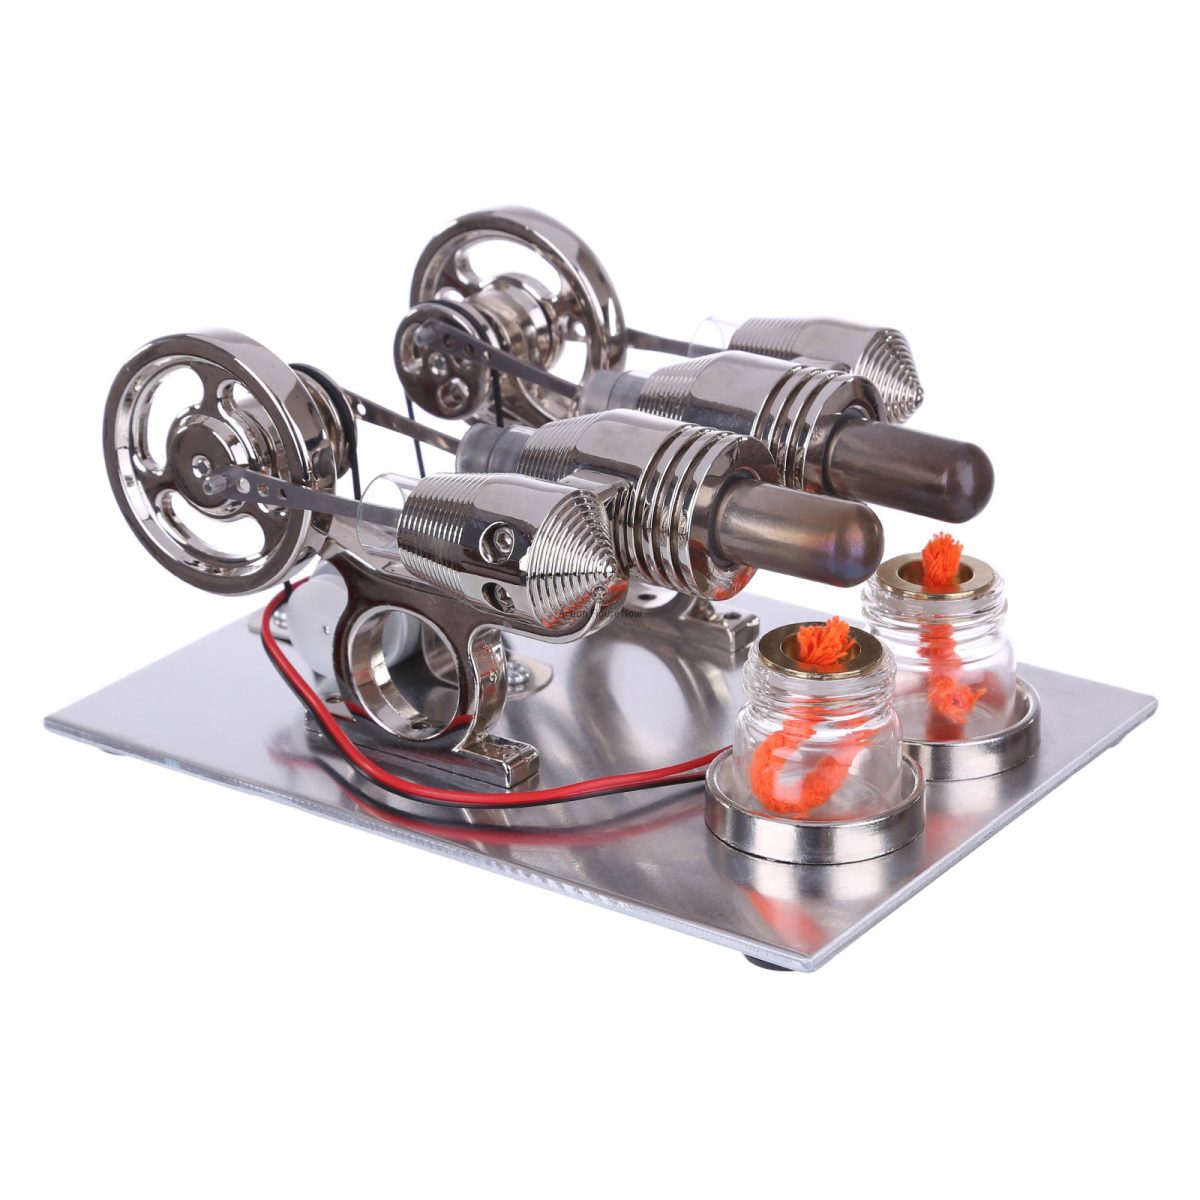 2-Cylinder Stirling Engine Model with Digital Voltage Display, LED Bulb, and Physical Experiment Toy for STEM Education